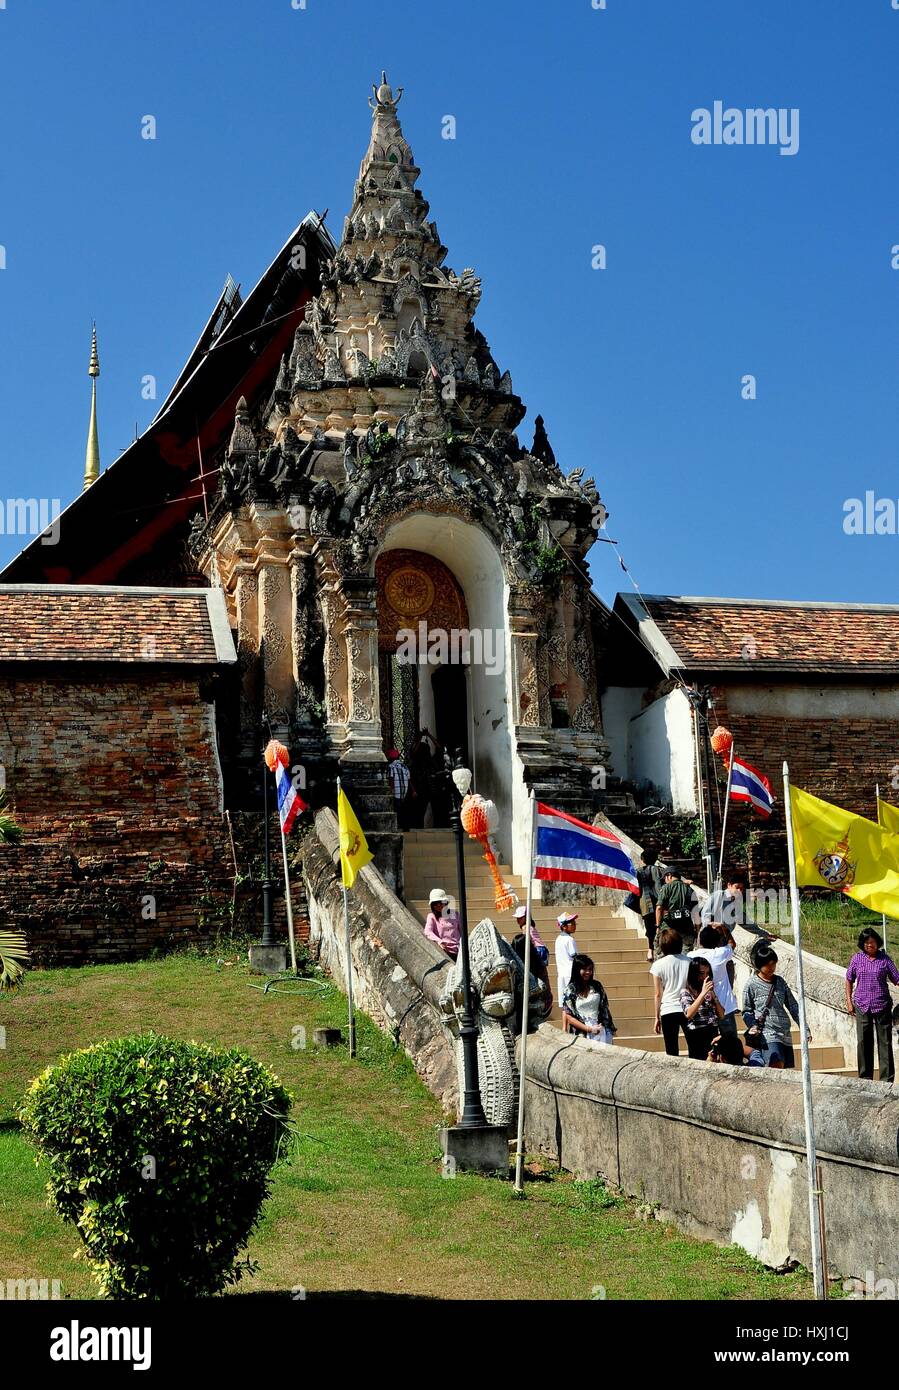 Lampang, Thailand - December 28, 2012:  Entrance gate with Hindu design elements leads into the walled Wat Phra That Lampang Luan Stock Photo